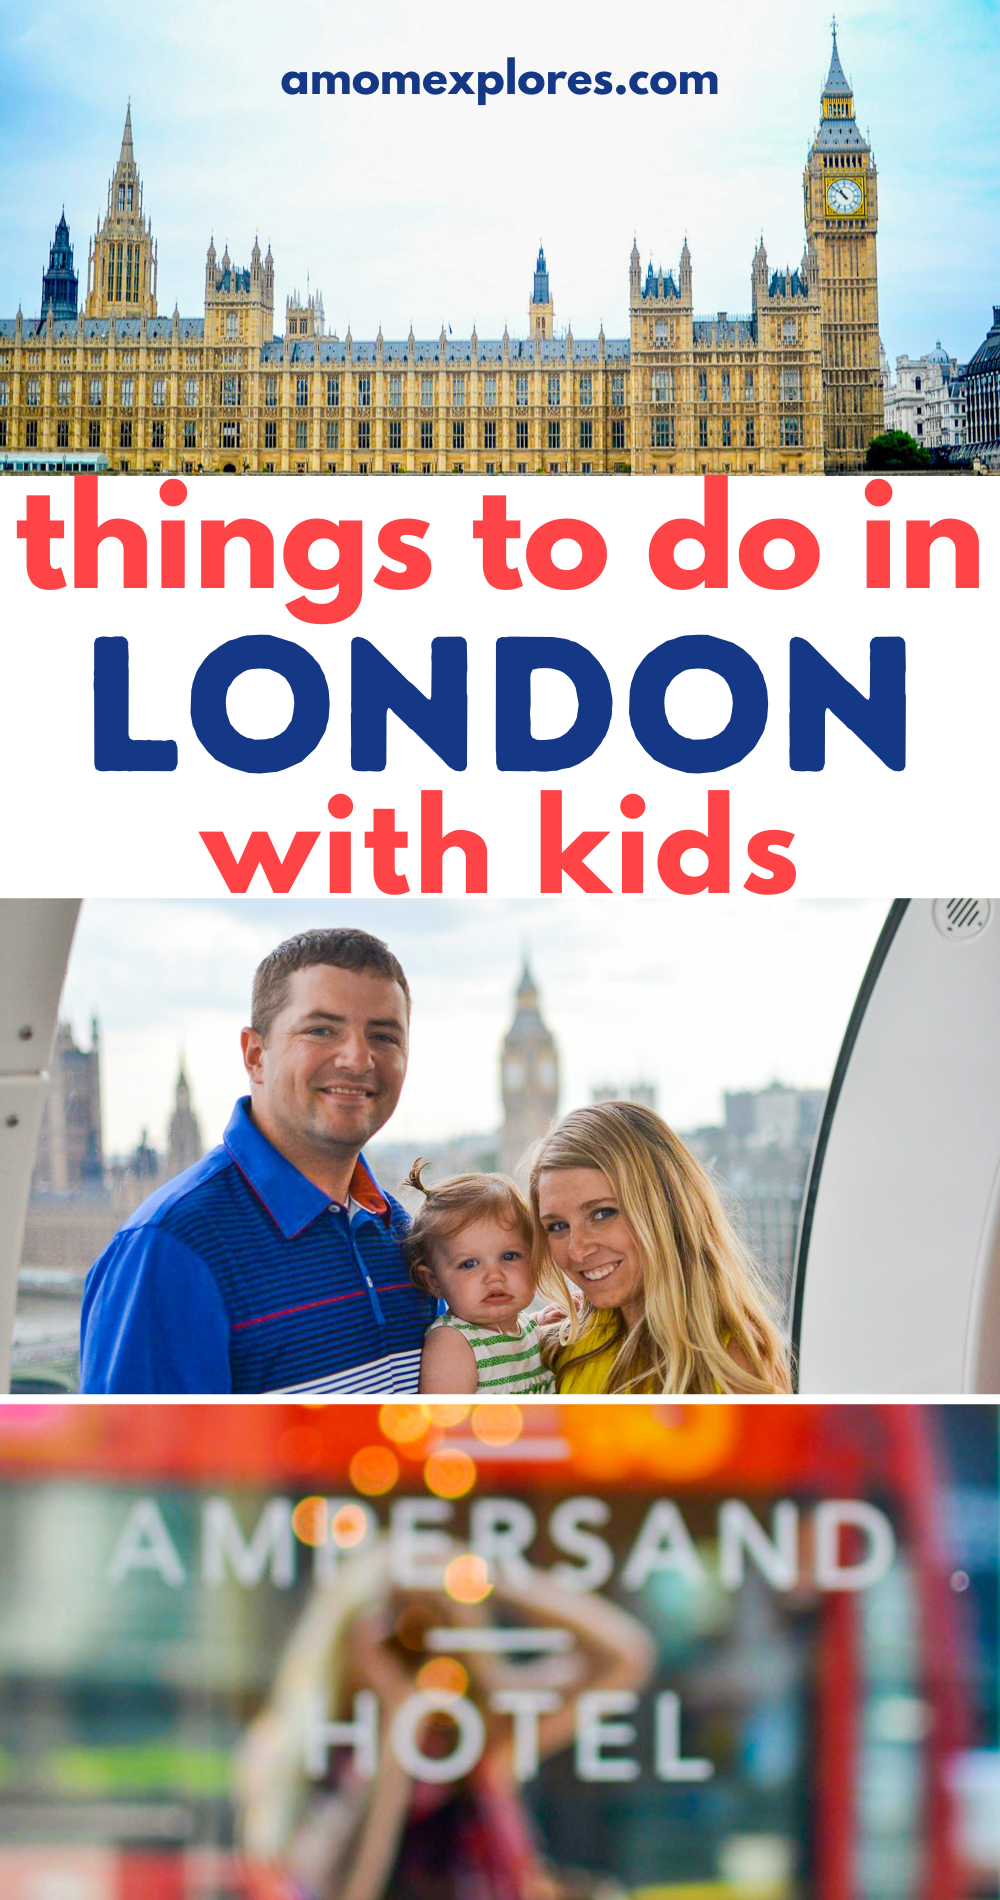 things to do in London with kids.png